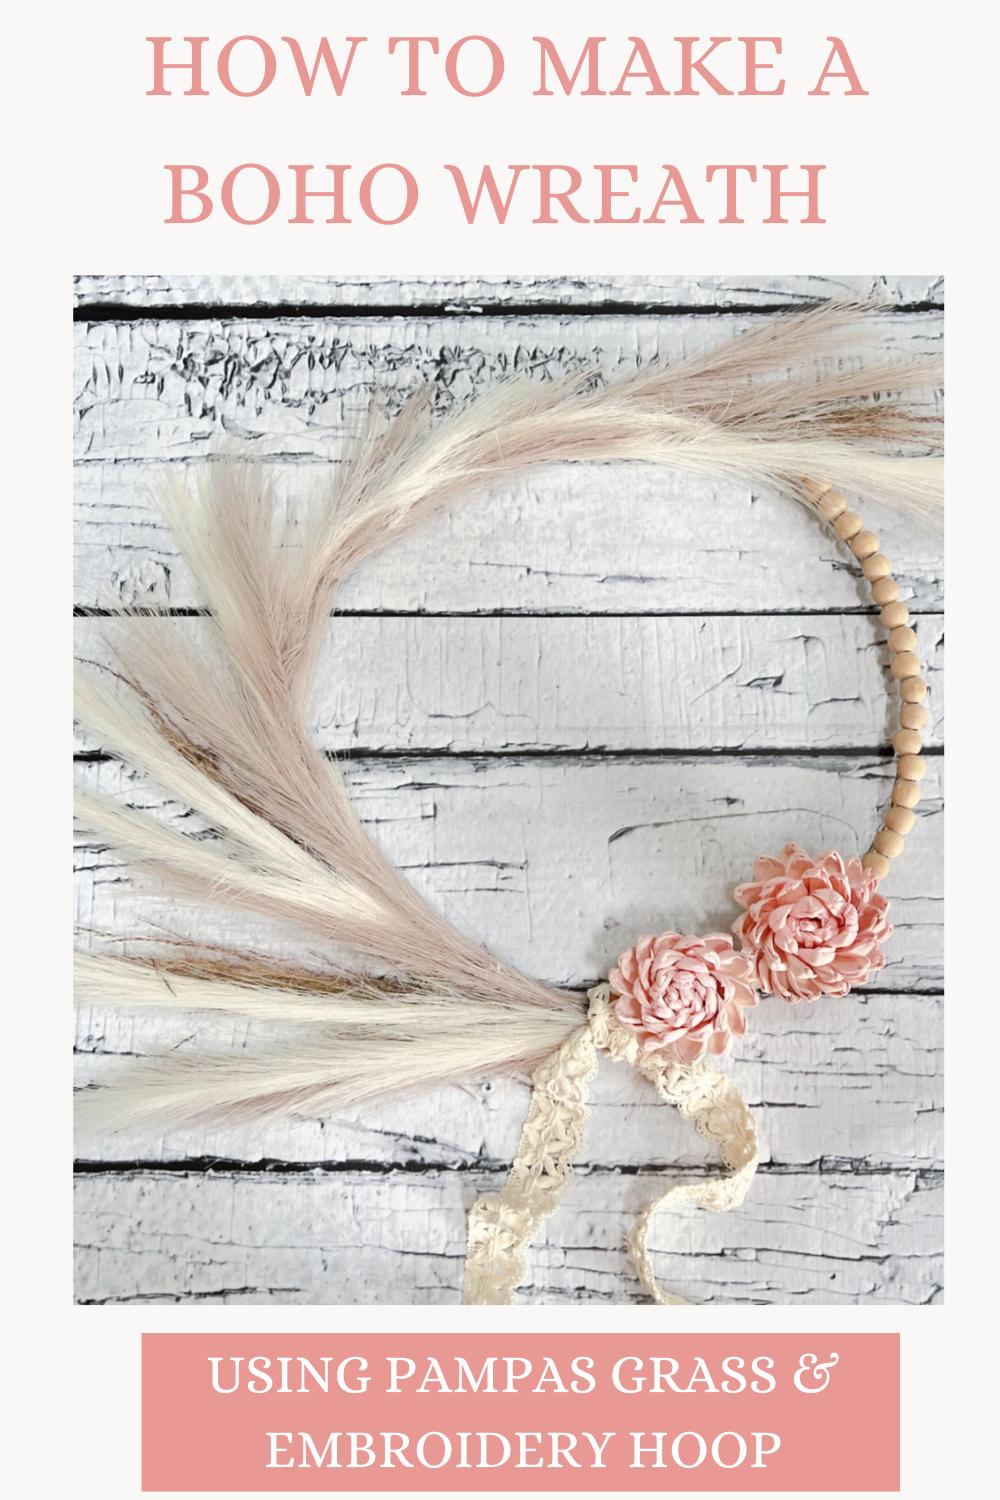 DIY Boho Wreath using Pampas Grass And Embroidery Hoop